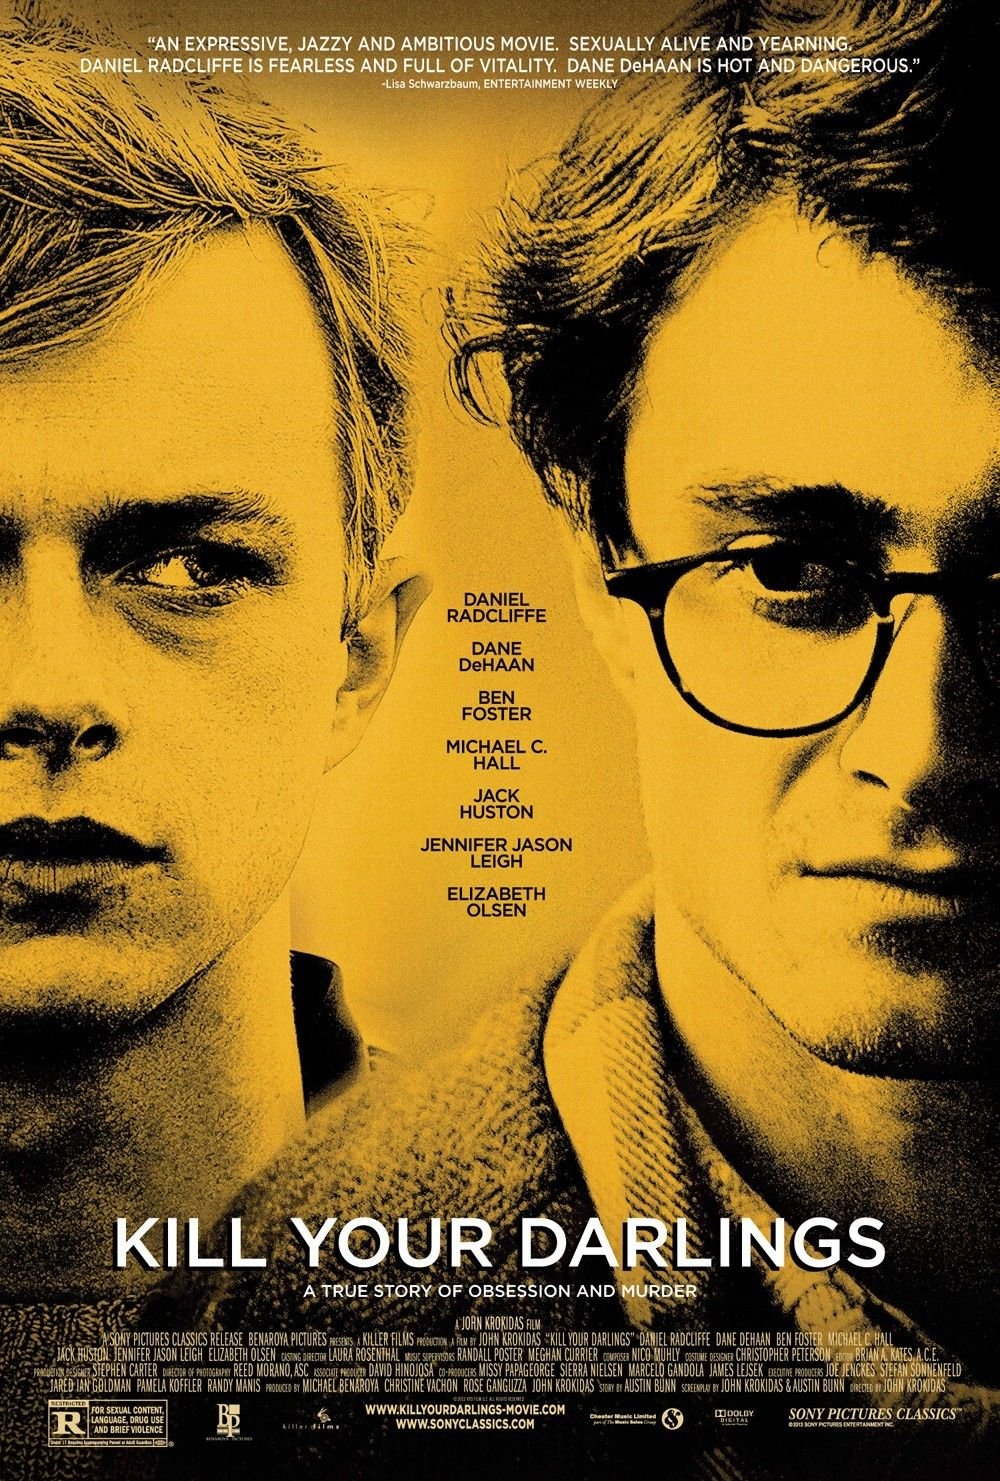 Poster of the movie Kill Your Darlings